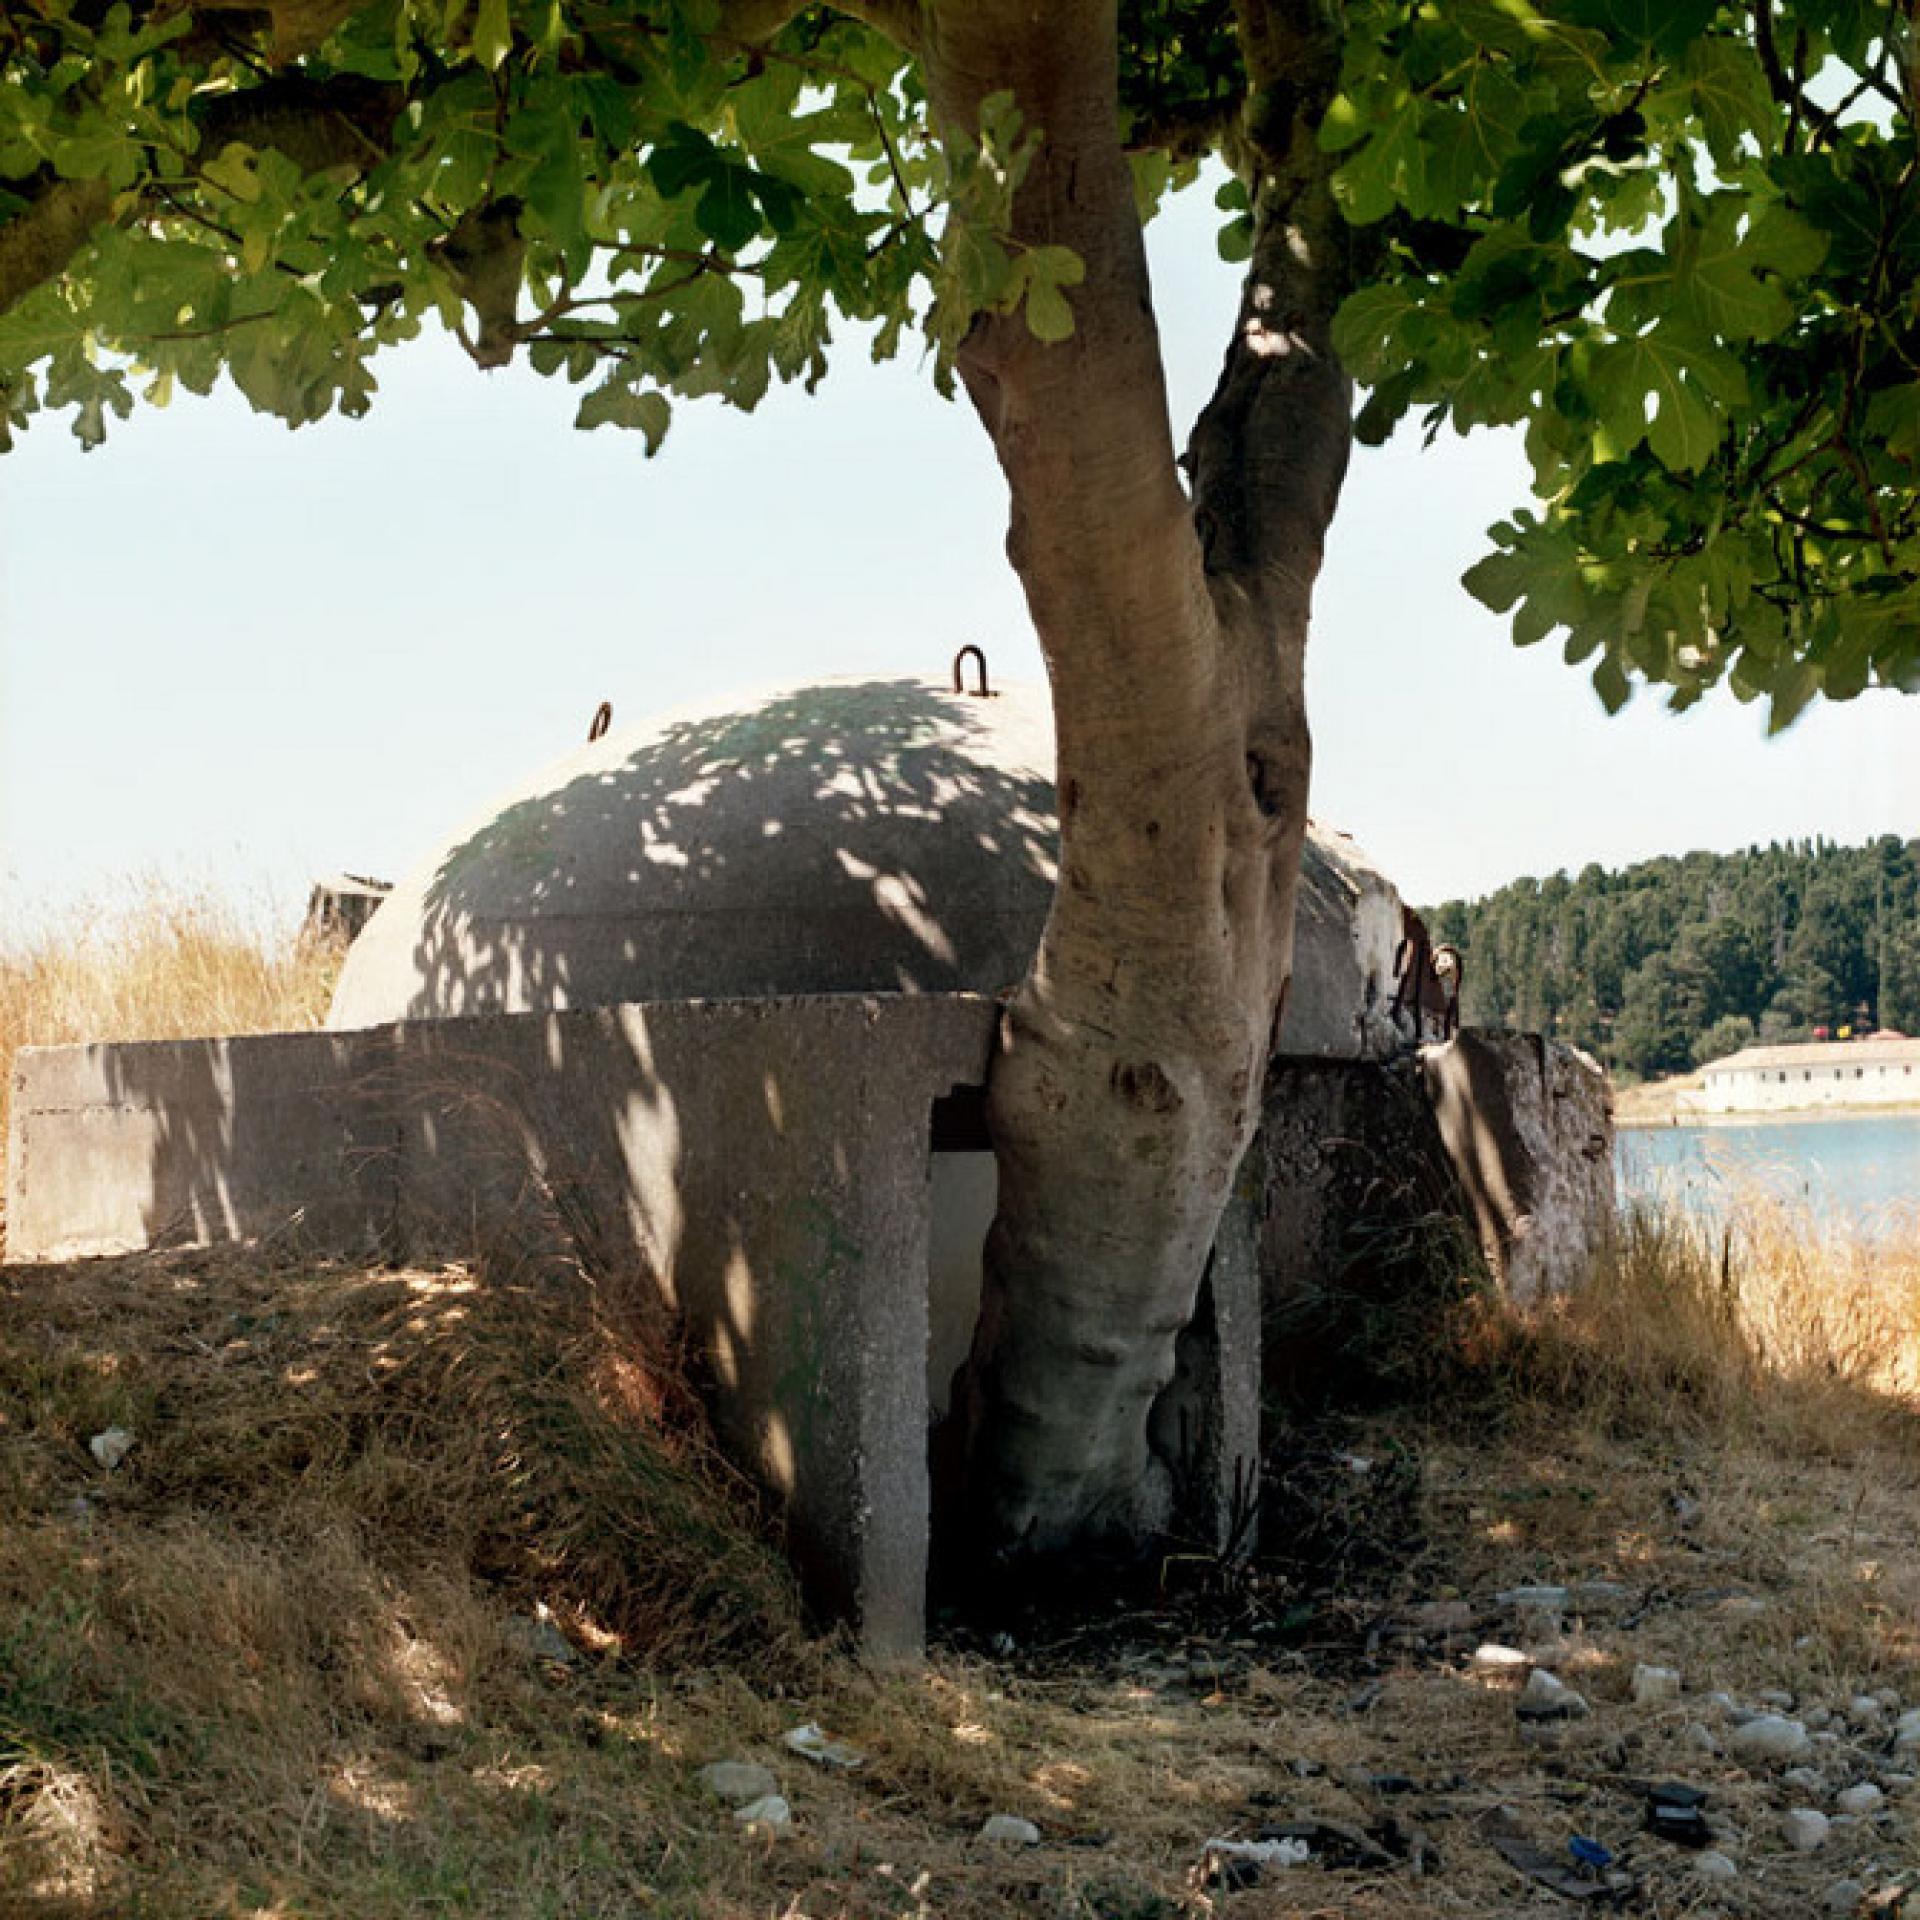 Untouched for decades, the bunker shields a tree. | Photo © Alicja Dobrucka